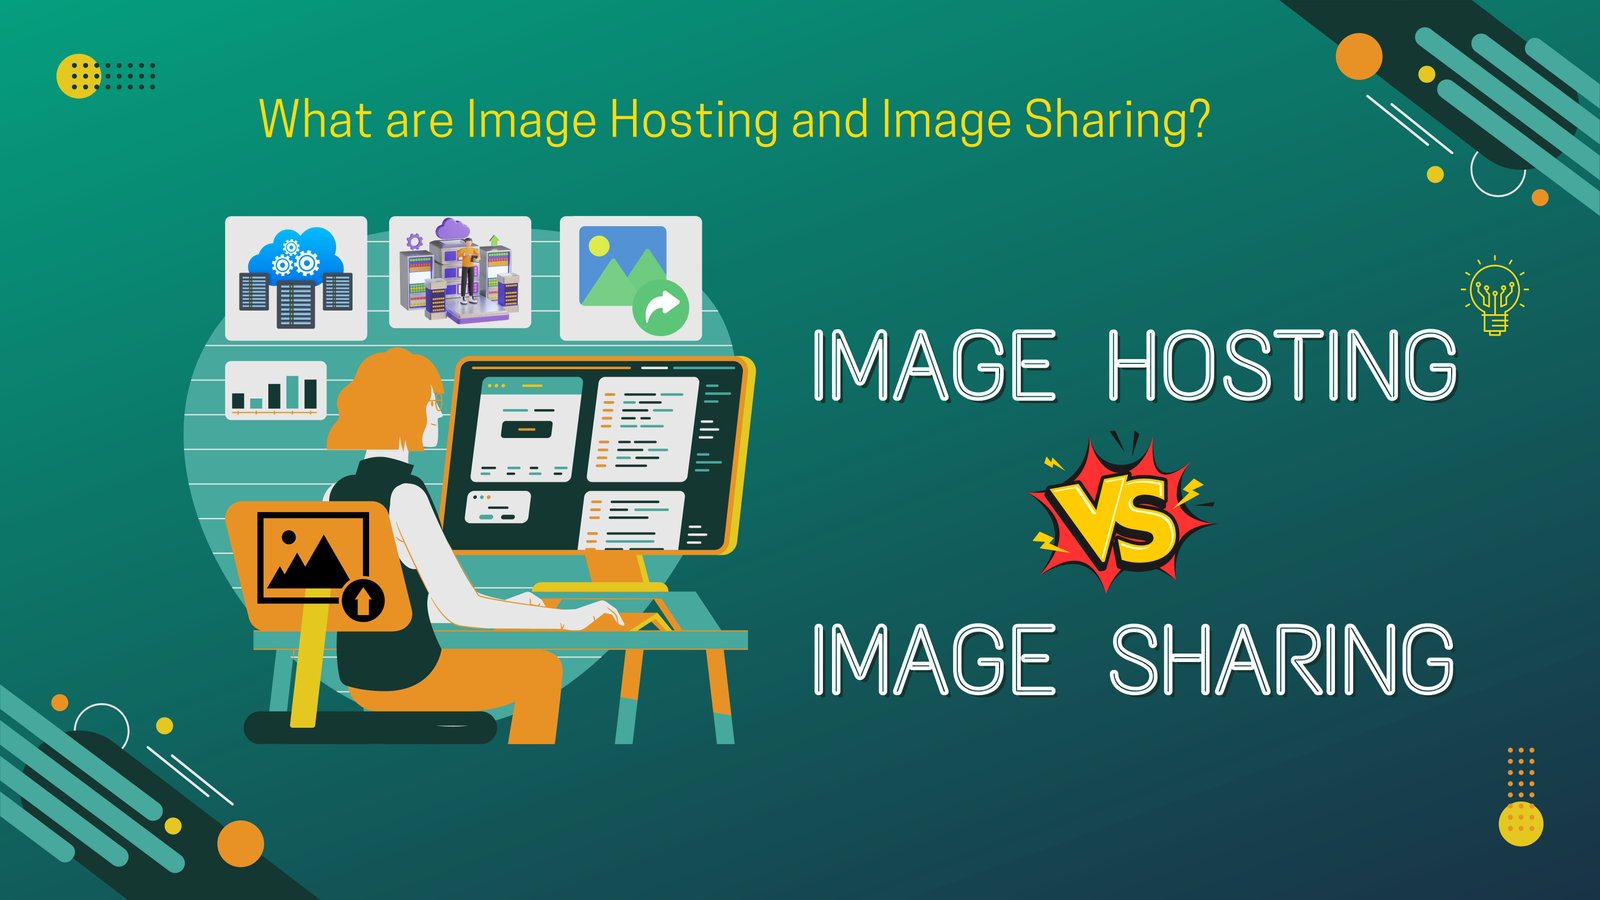 What are Image Hosting and Image Sharing?